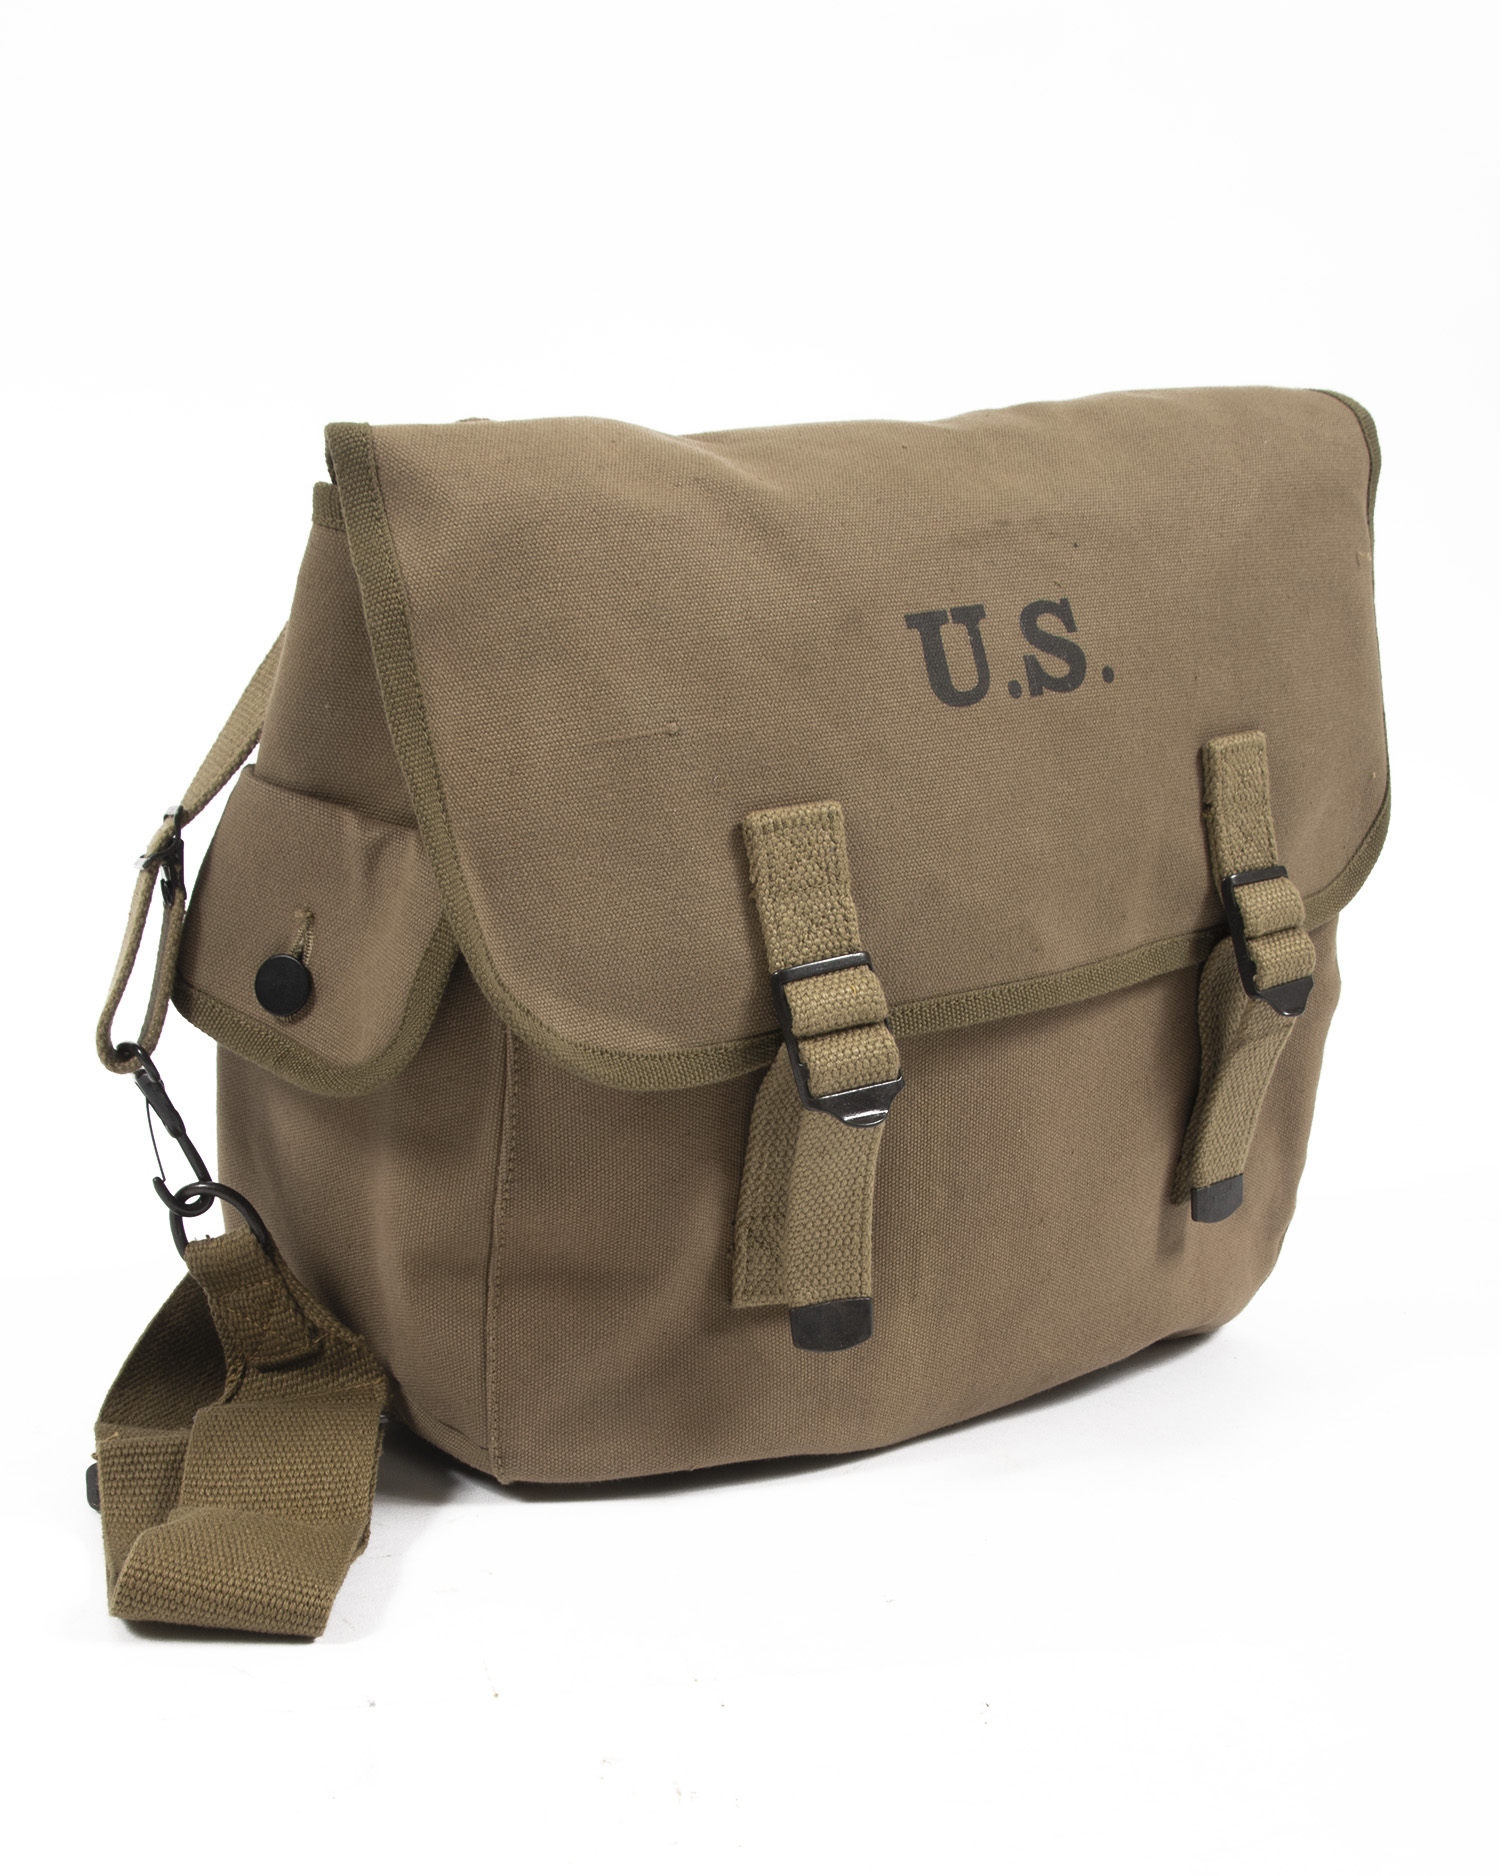 WWII US Army M1936 Musette Bag